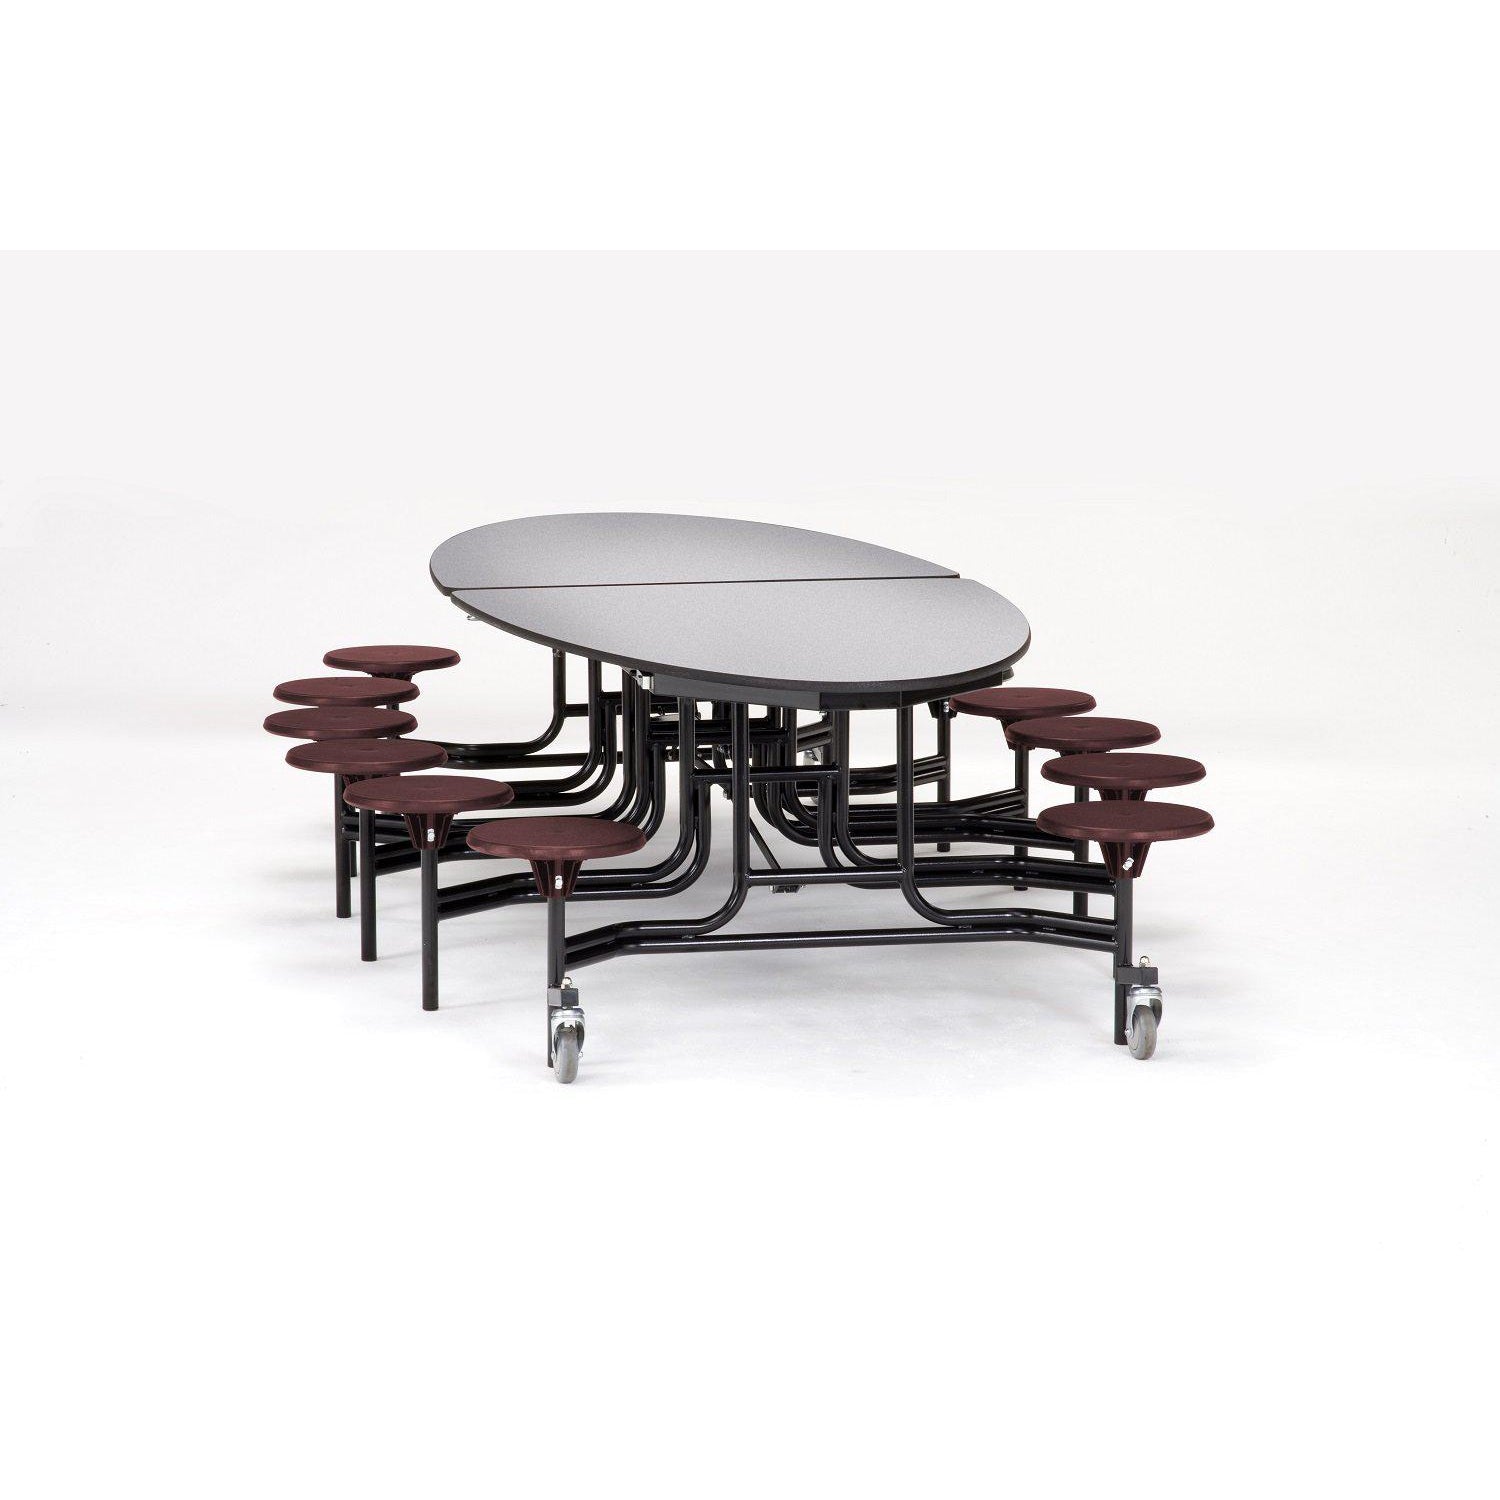 Mobile Cafeteria Table with 12 Stools, 10' Elliptical, Plywood Core, Vinyl T-Mold Edge, Textured Black Frame